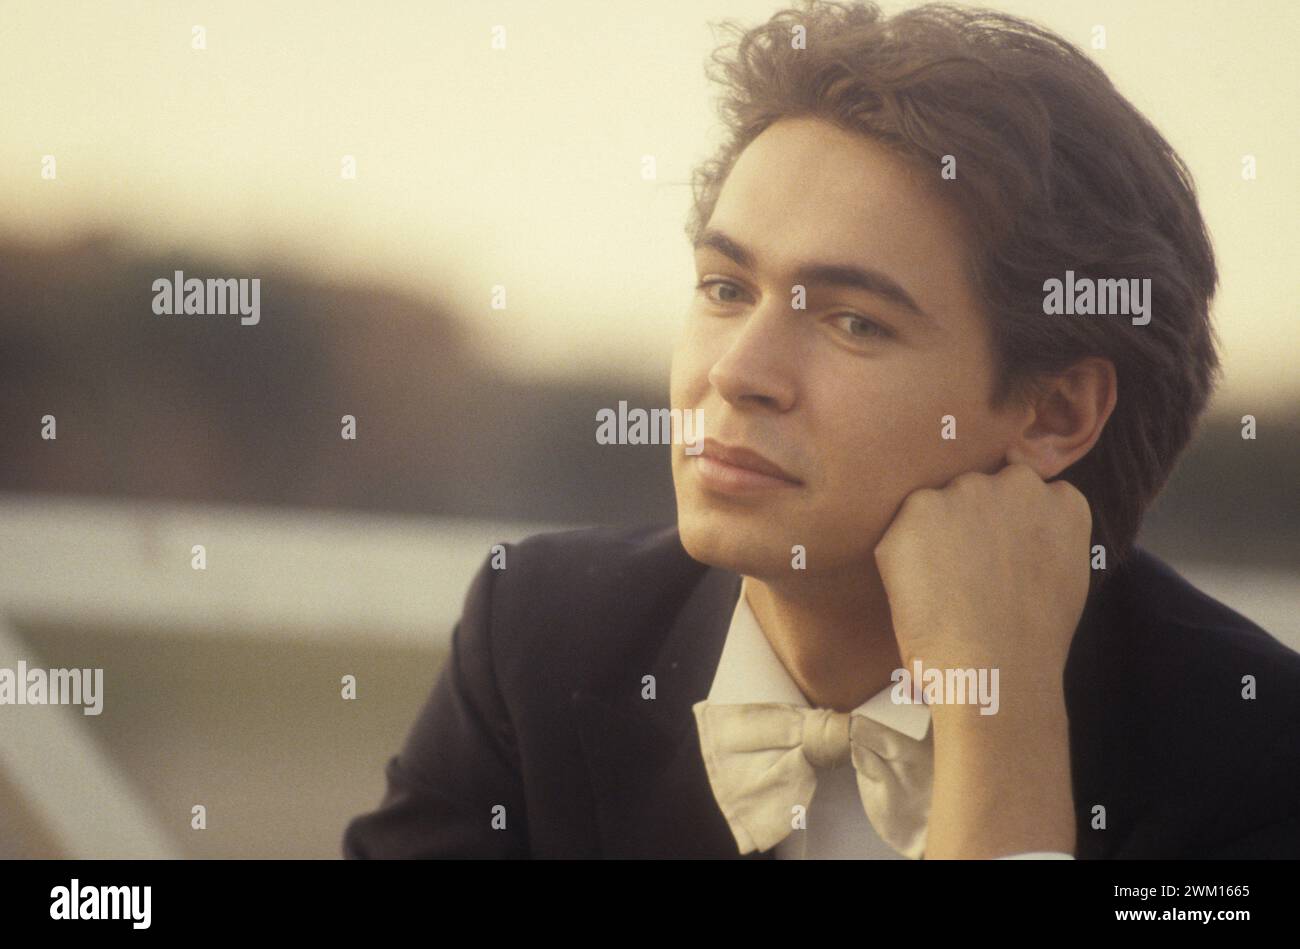 3830252 Ivo Pogorelich; (add.info.: Croatian pianist Ivo Pogorelich (1983) / Il pianista Ivo Pogorelic (1983)); © Marcello Mencarini. All rights reserved 2024. Stock Photo